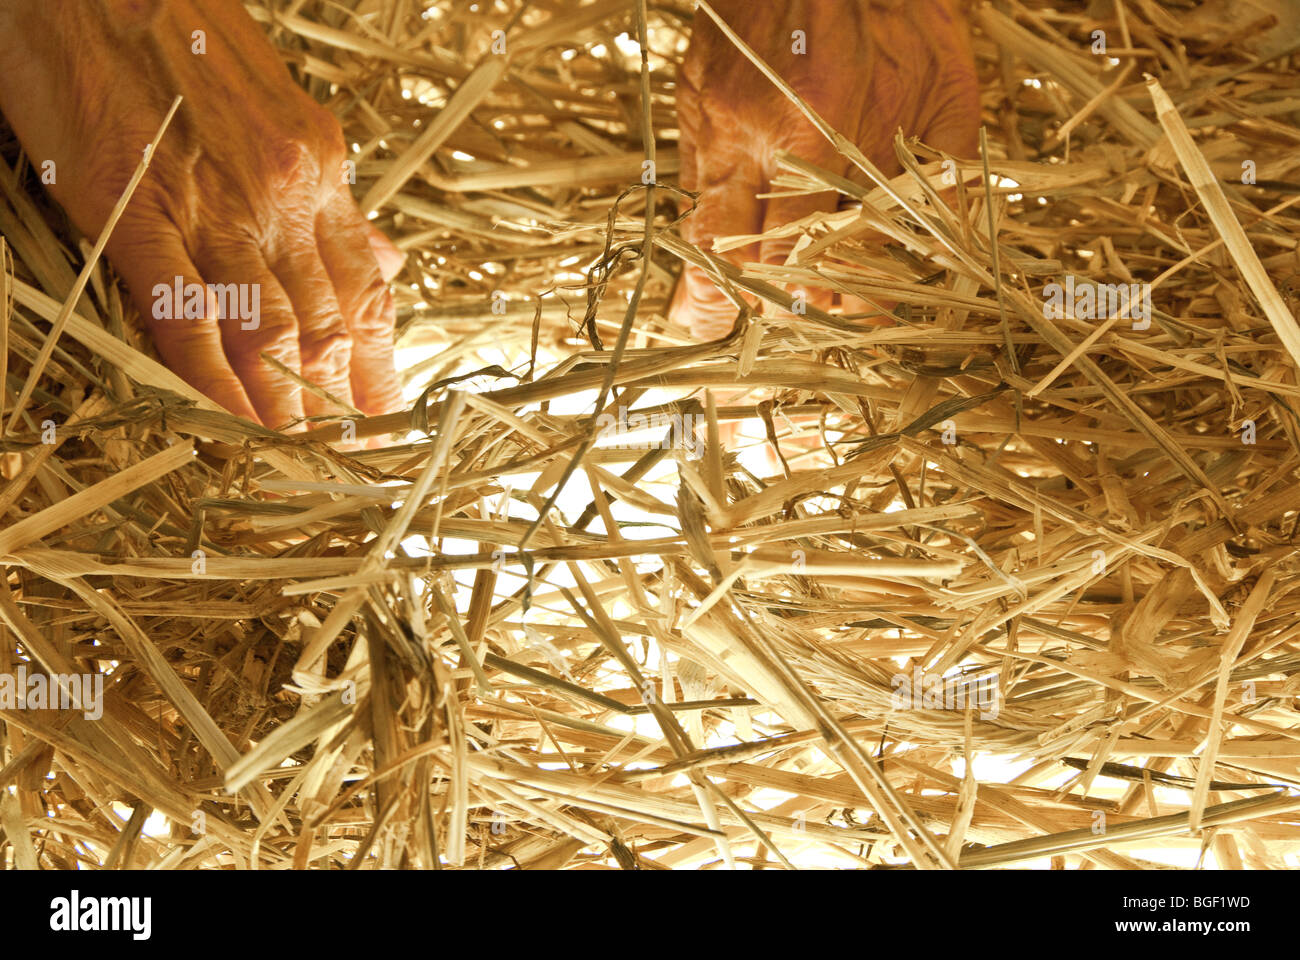 Man searching for a needle in a haystack Stock Photo